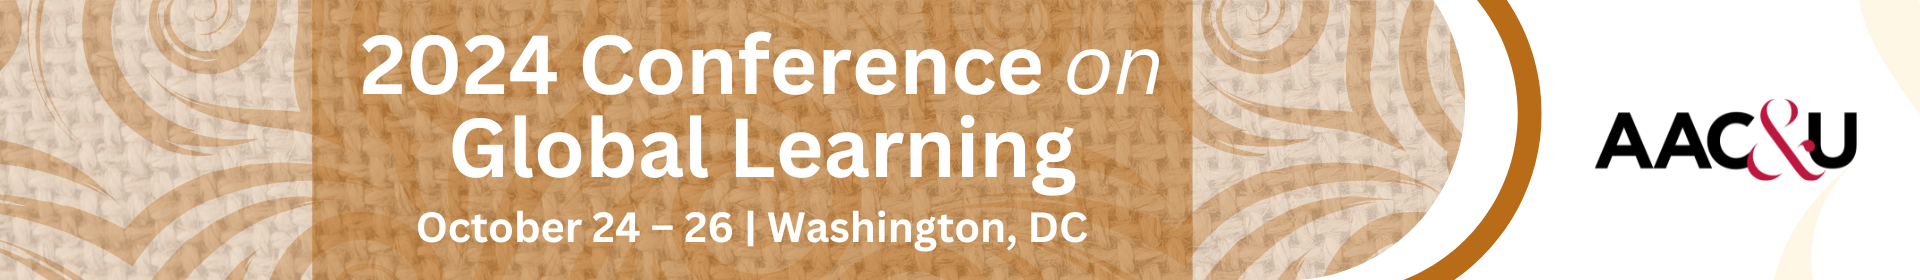 2024 Conference on Global Learning Event Banner